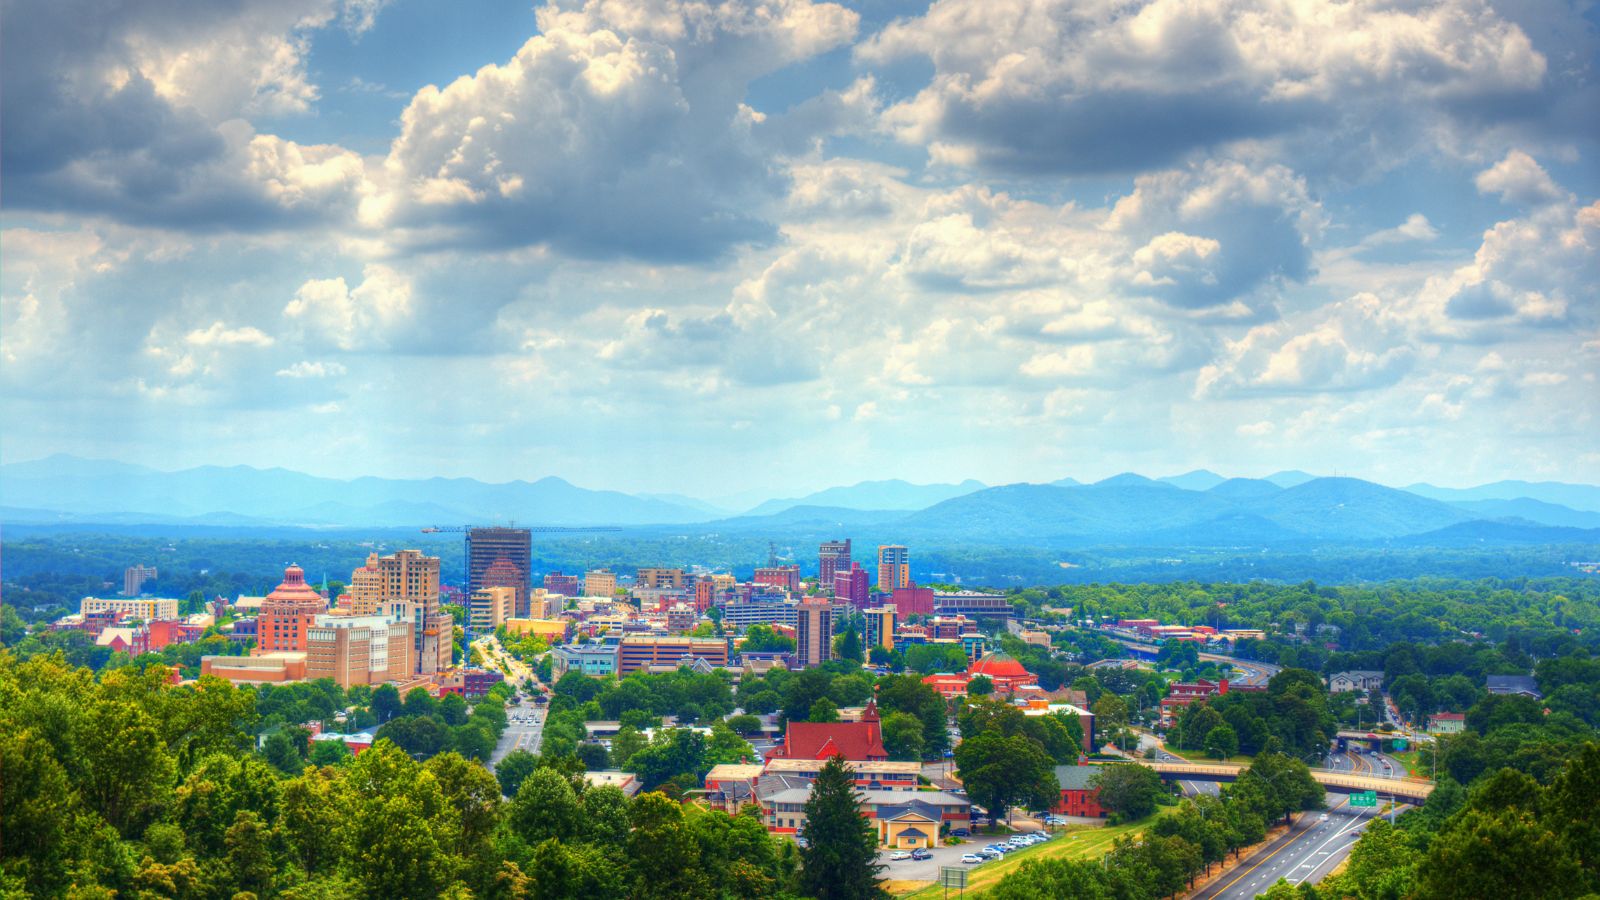 <p><a href="https://www.forbes.com/places/nc/asheville/?sh=277b05516b6f">Forbes</a> listed this town, nestled in the Blue Ridge Mountains, as one of the best places to retire in 2021. The reasons were an abundance of doctors, clean air, a mild climate, no state taxes on Social Security benefits, and a decent economy. Asheville is also a great place for retirement-friendly outdoor activities, like biking and walking.</p>